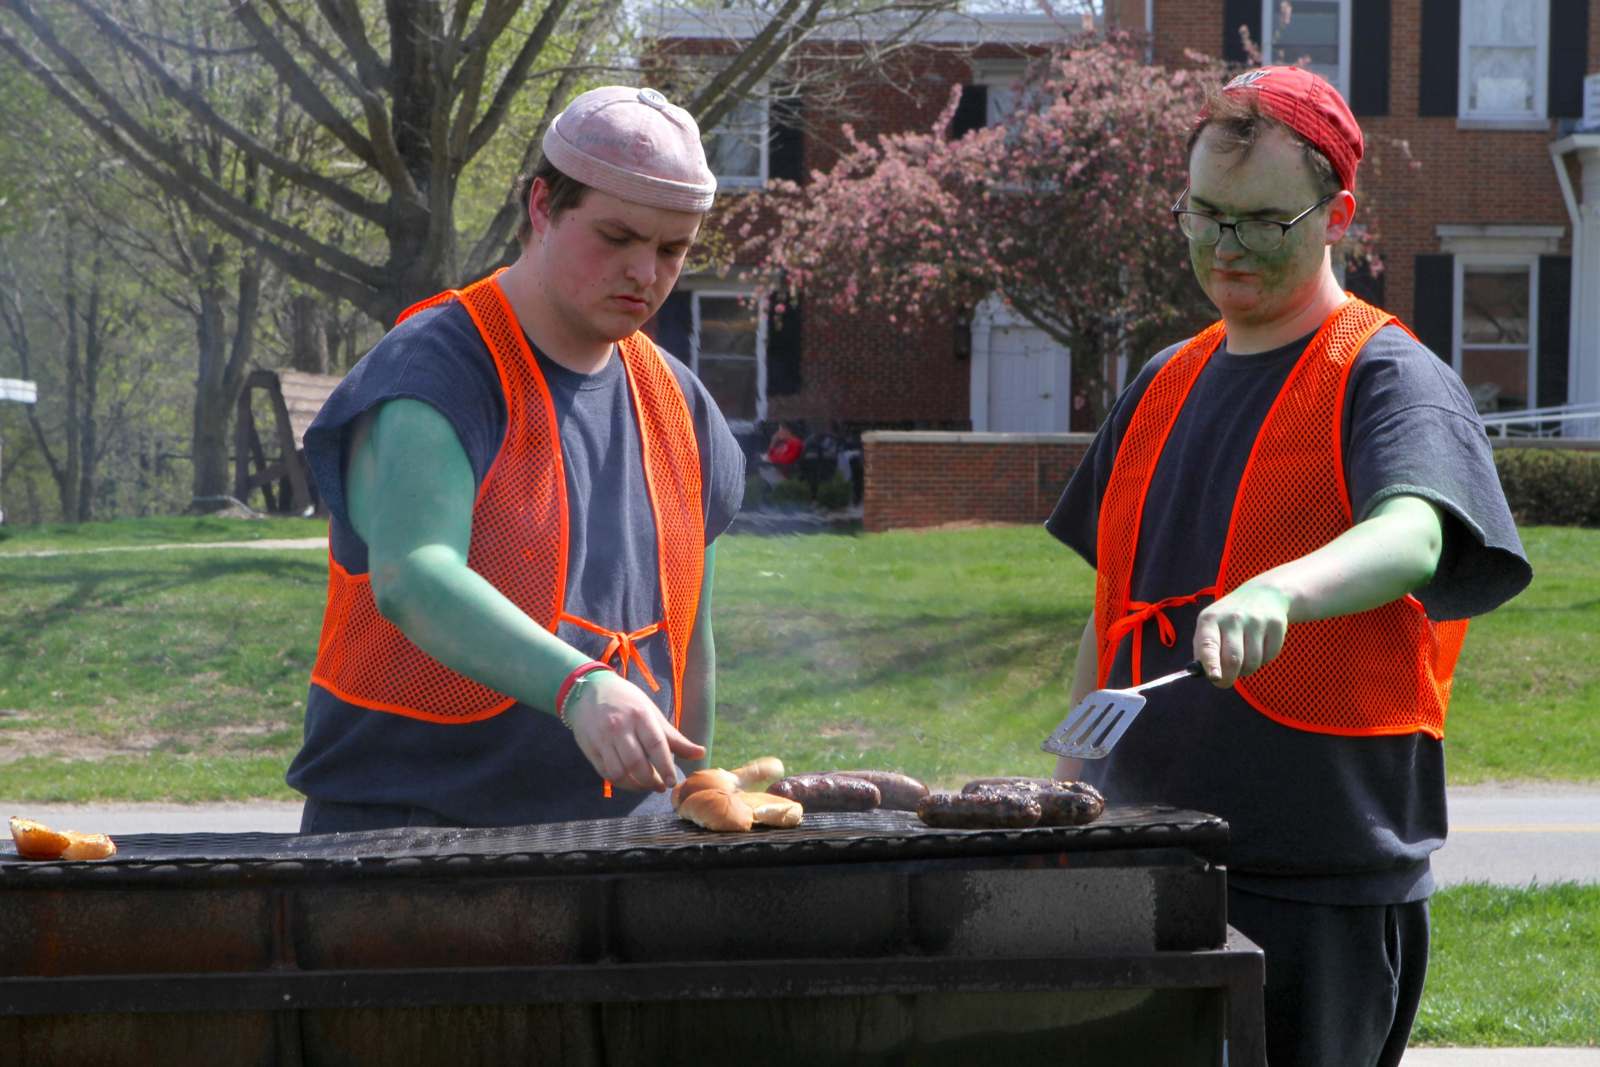 a group of men wearing orange vests cooking food on a grill